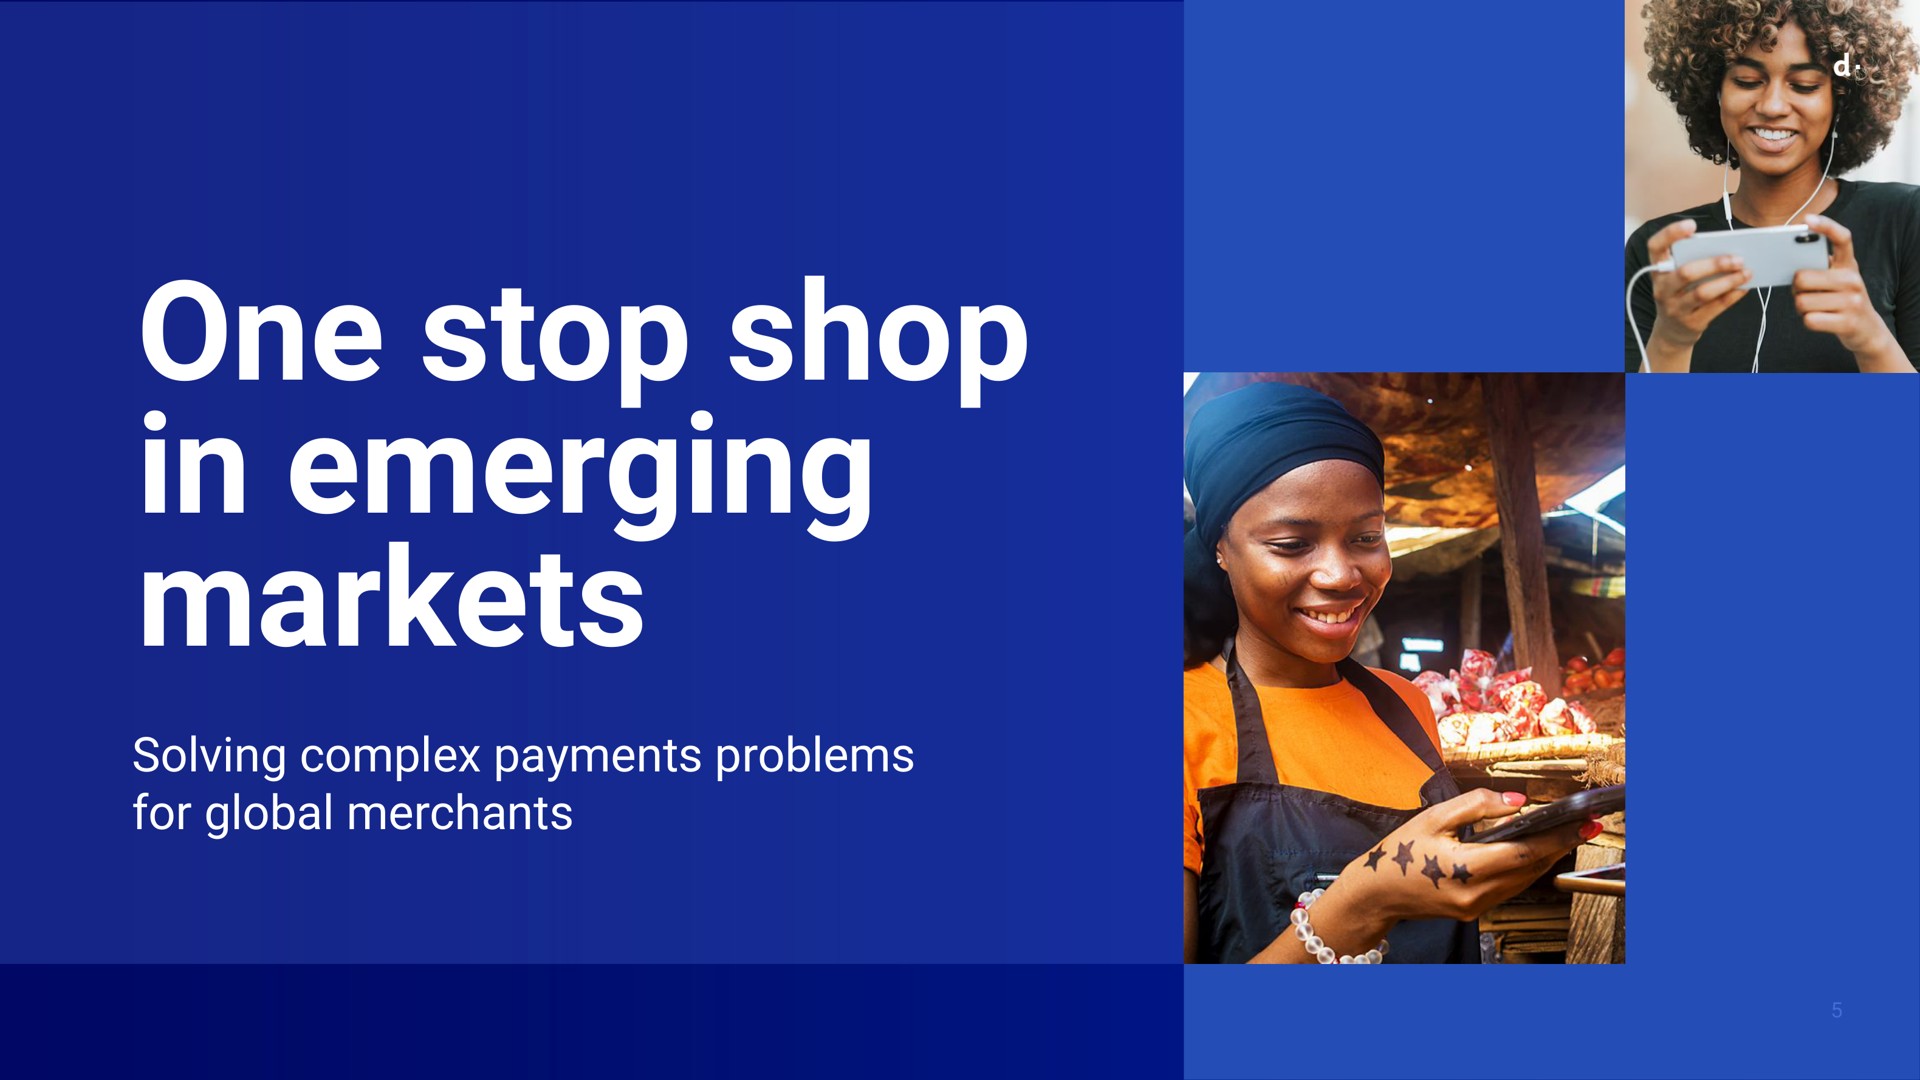 one stop shop in emerging markets solving complex payments problems for global merchants | dLocal